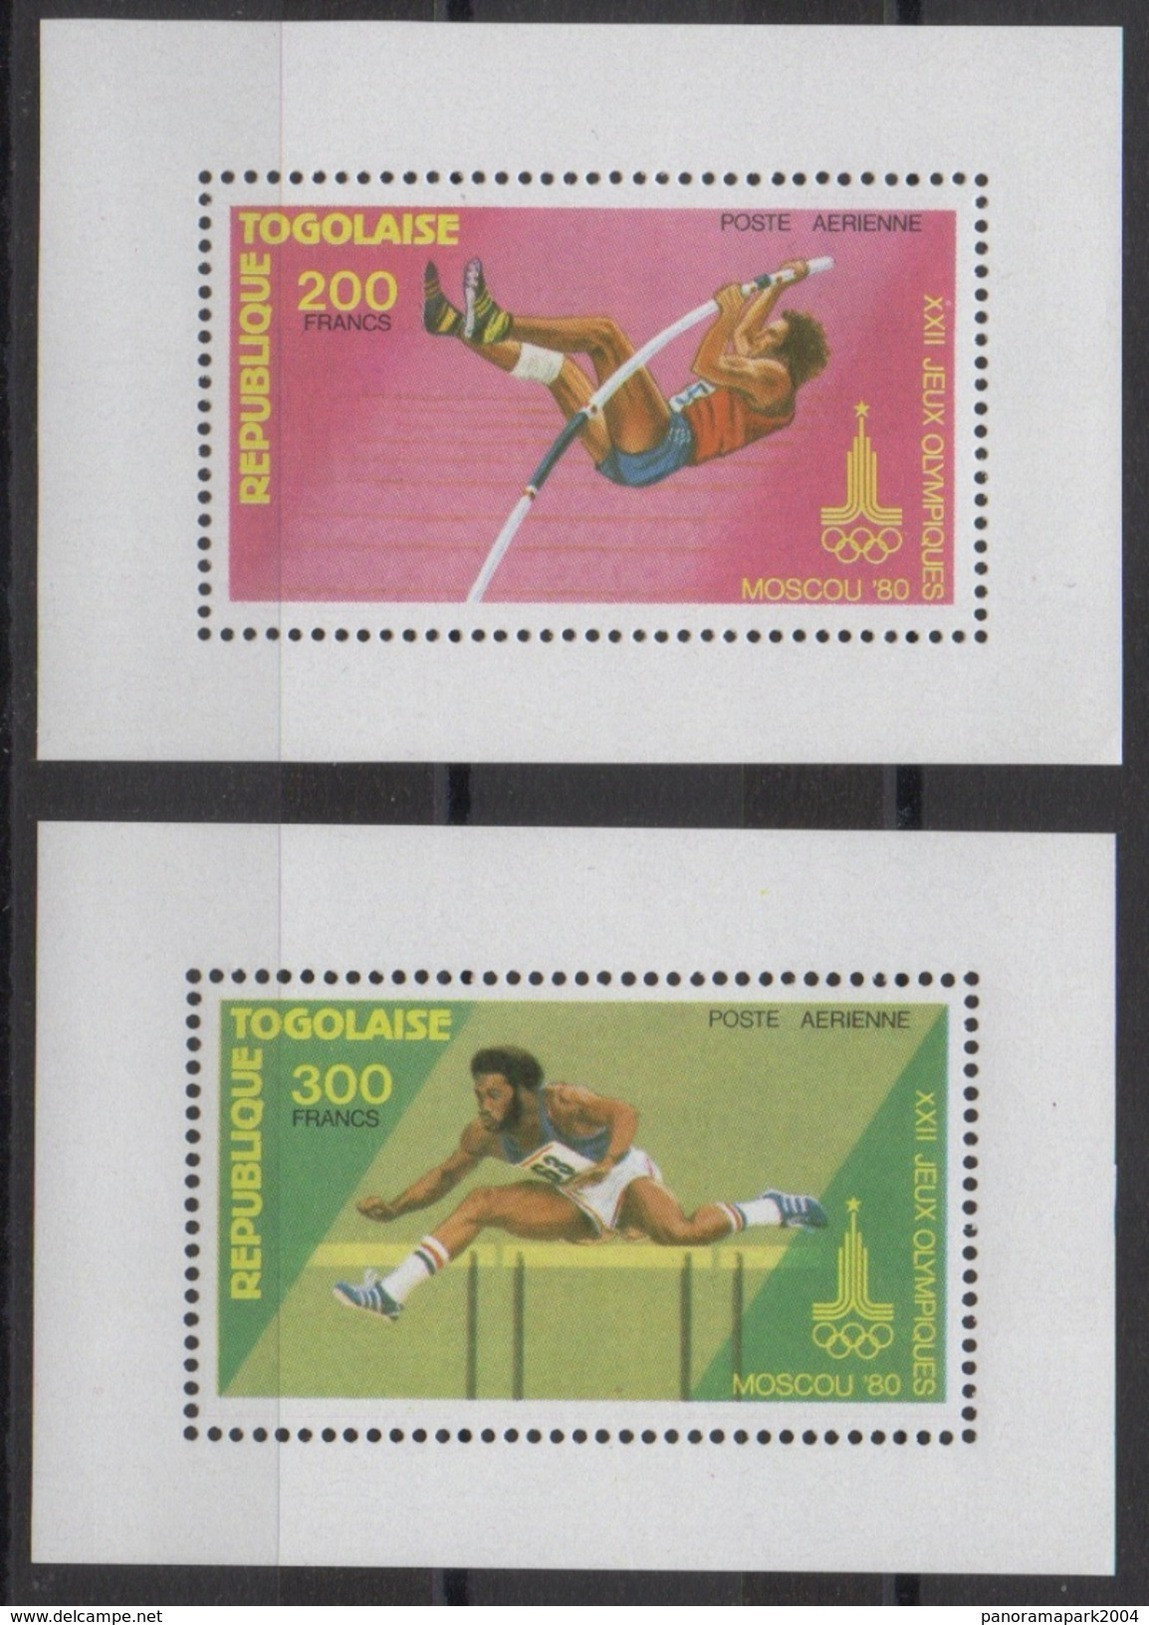 Togo 1980 Moscow Moskau Moscou Olympic Games Jeux Olympiques RARES Mini-Blocks Mi. 1426A 1427A UNLISTED - Togo (1960-...)